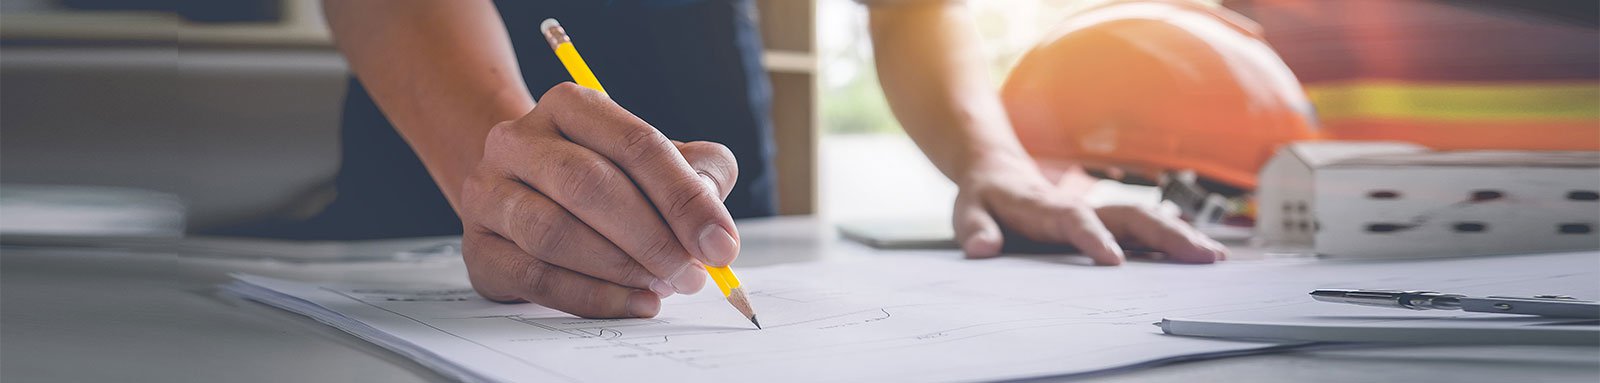 Man with hardhat drawing on building plans